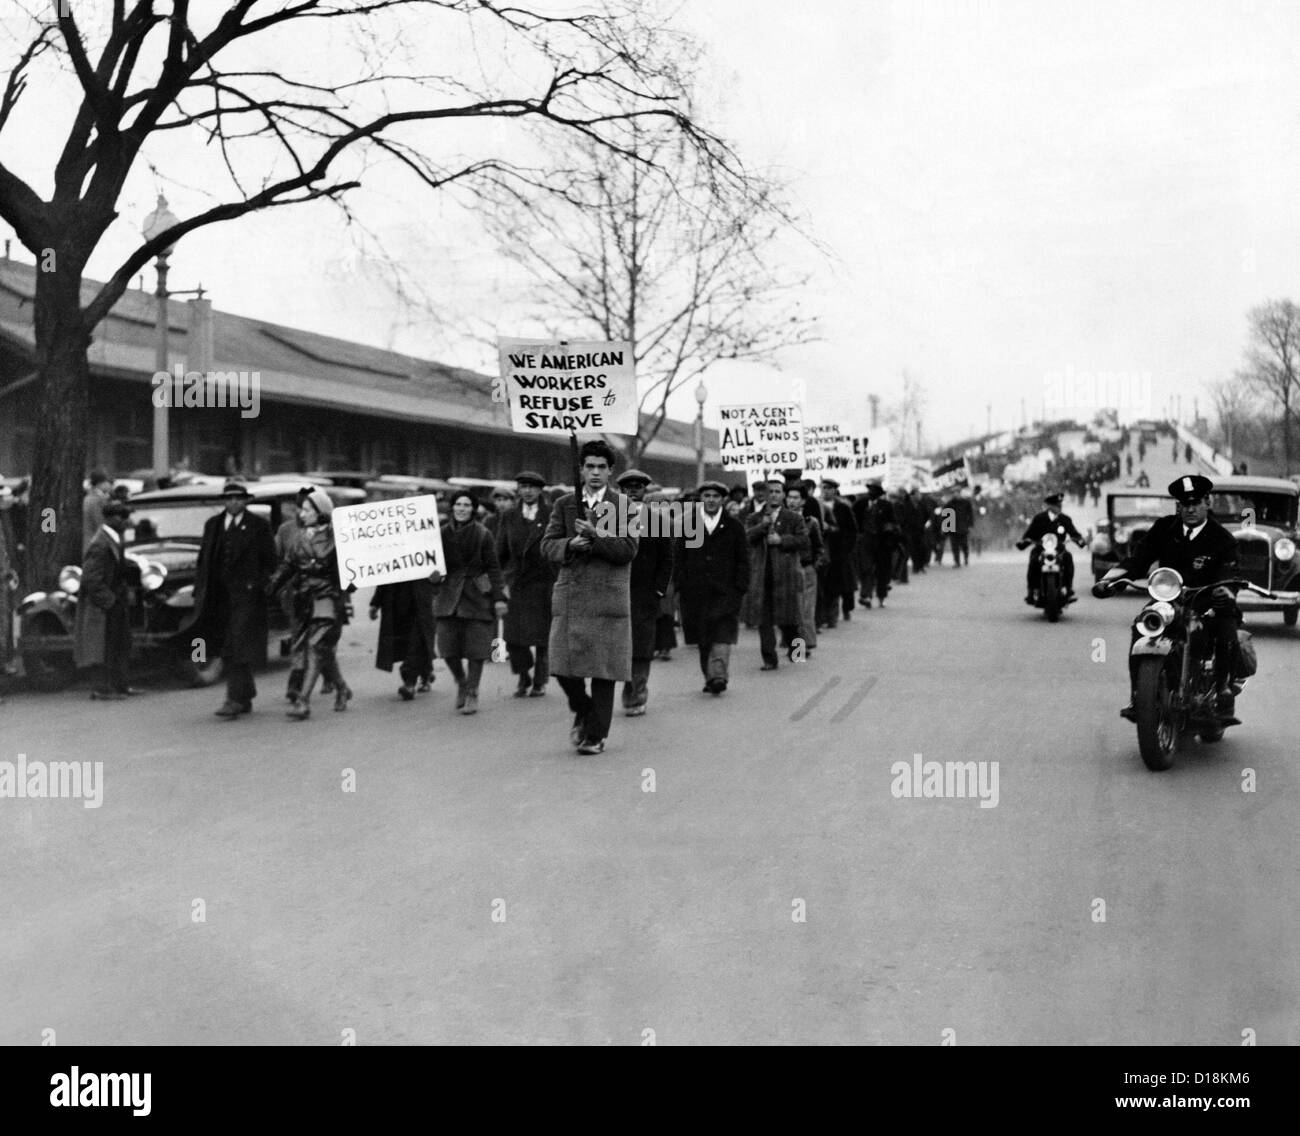 1400 Hunger Marchers arrive in Washington, DC. Their placards read; 'We American Workers Refuse to Starve'; and 'Not a Cent for Stock Photo